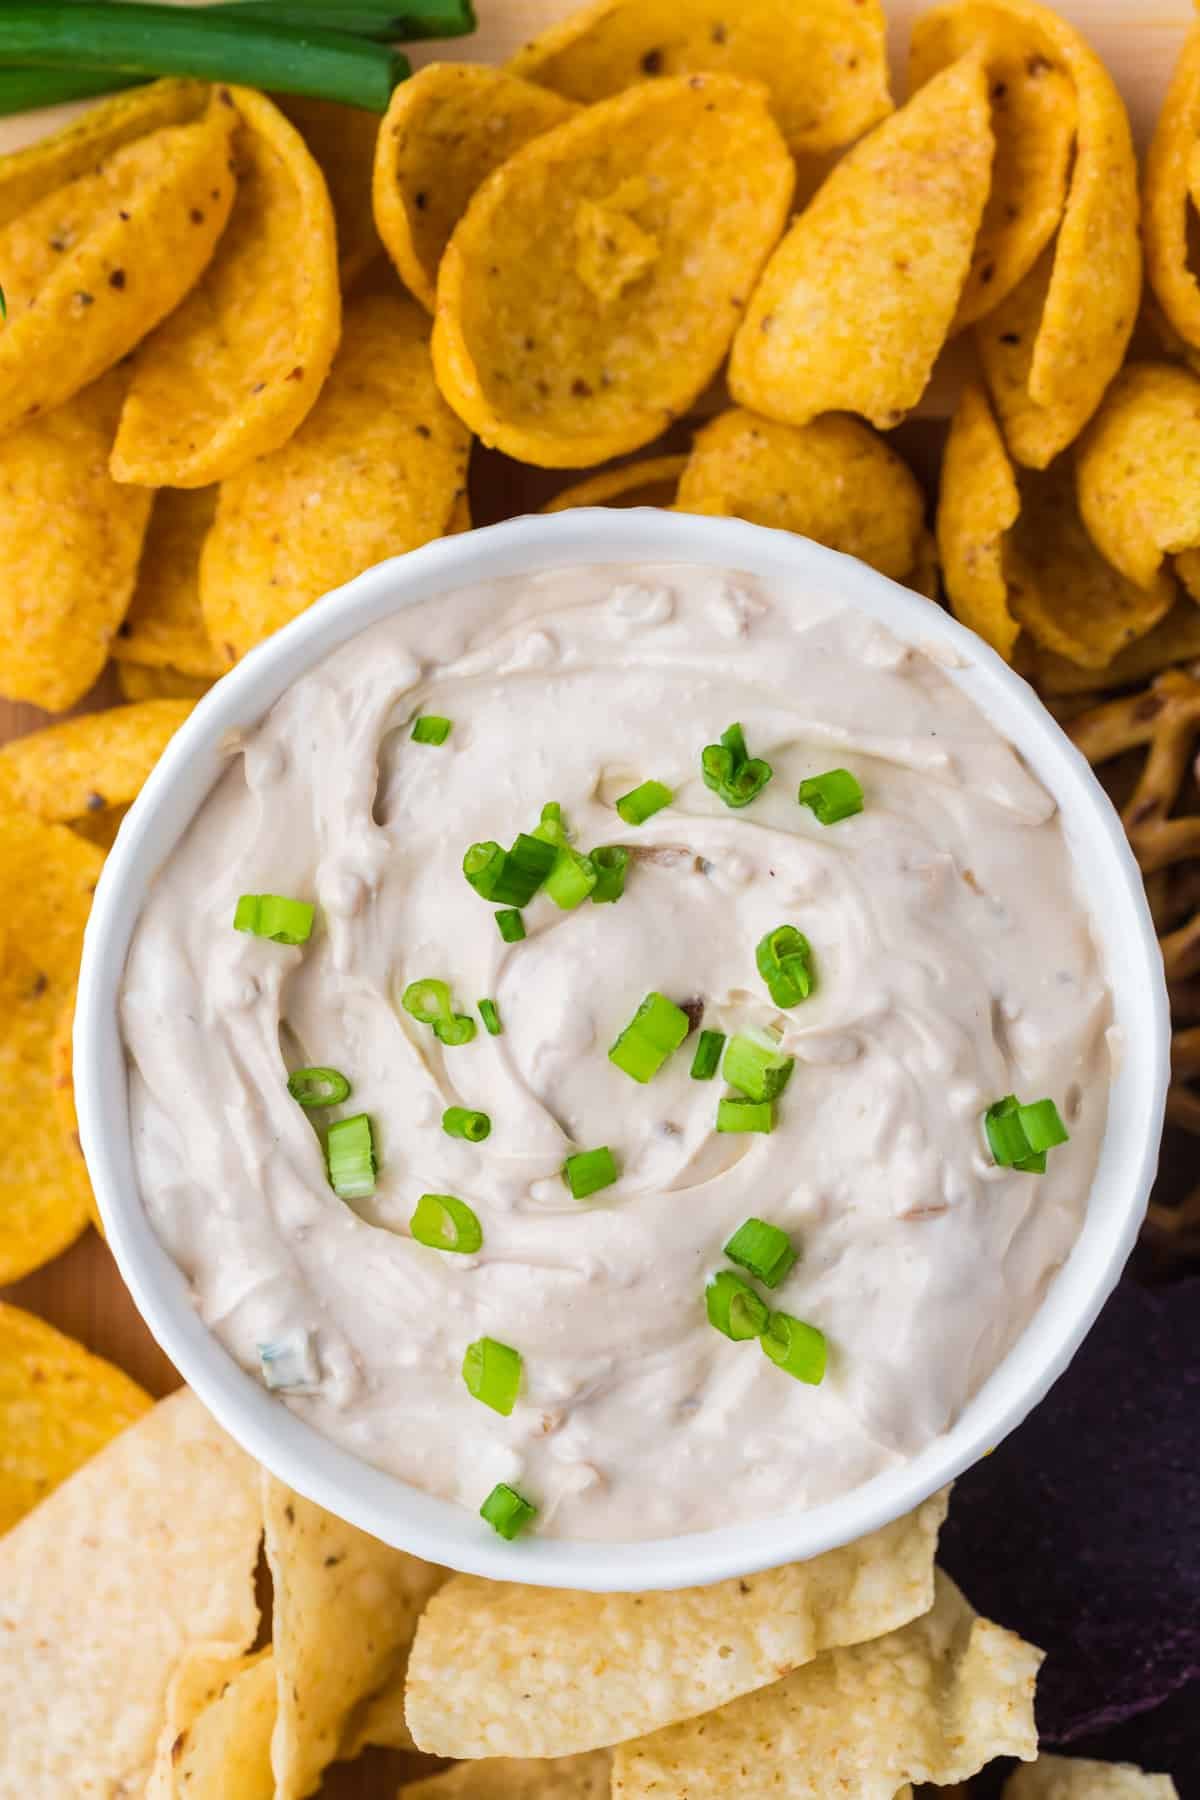 An overhead view of french onion dip garnished with green onions.